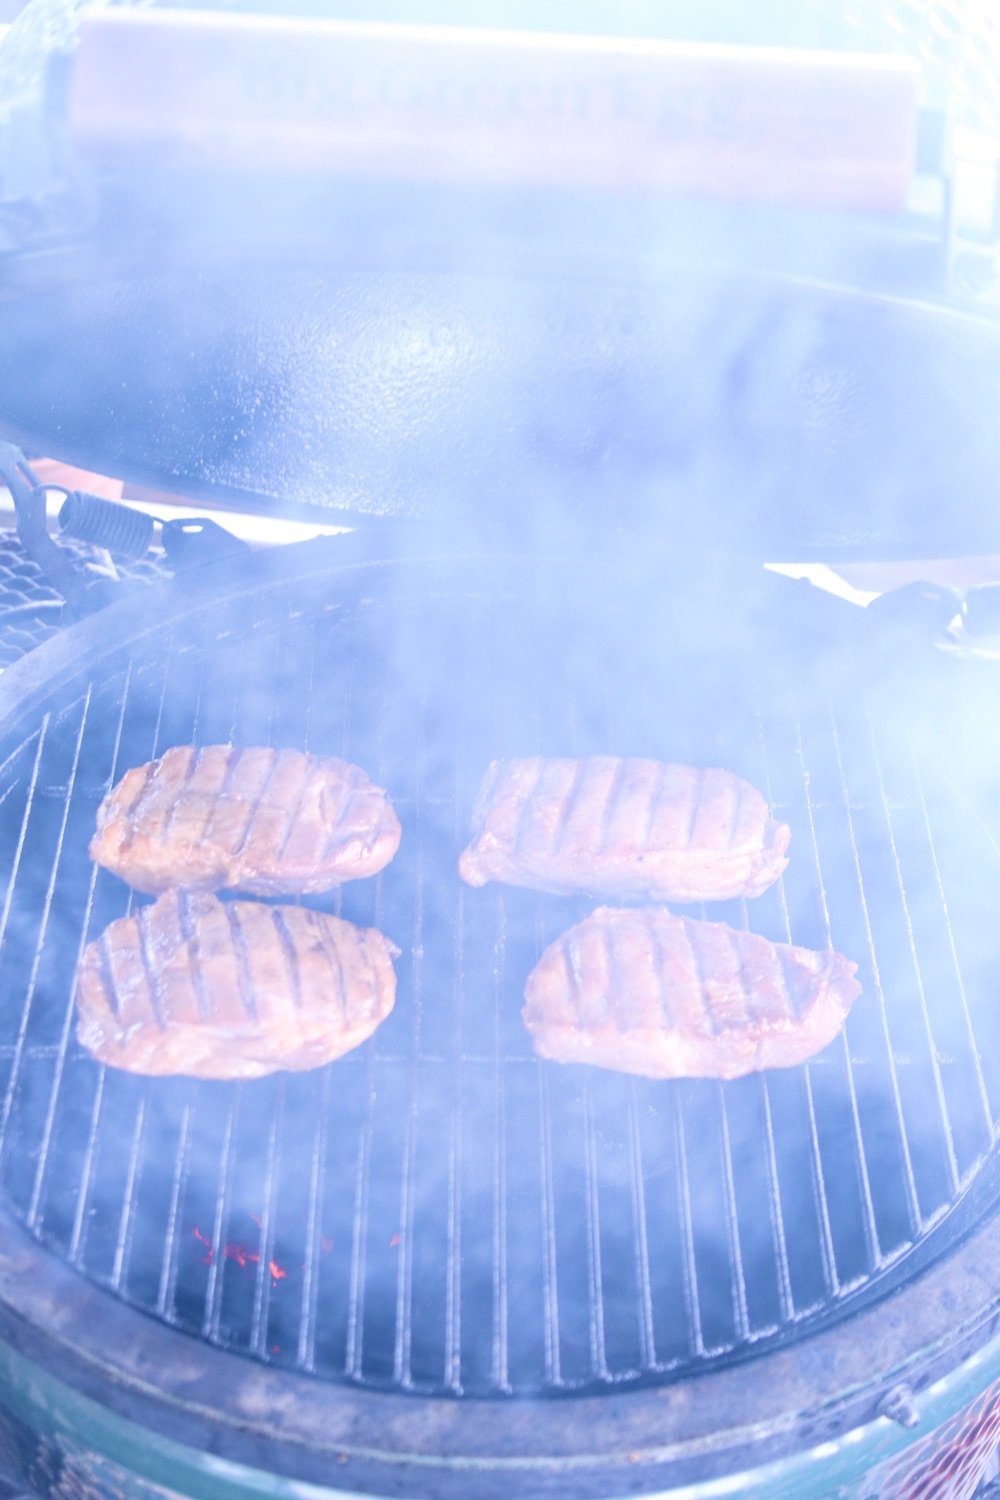 4 pork chops on a grill with smoke